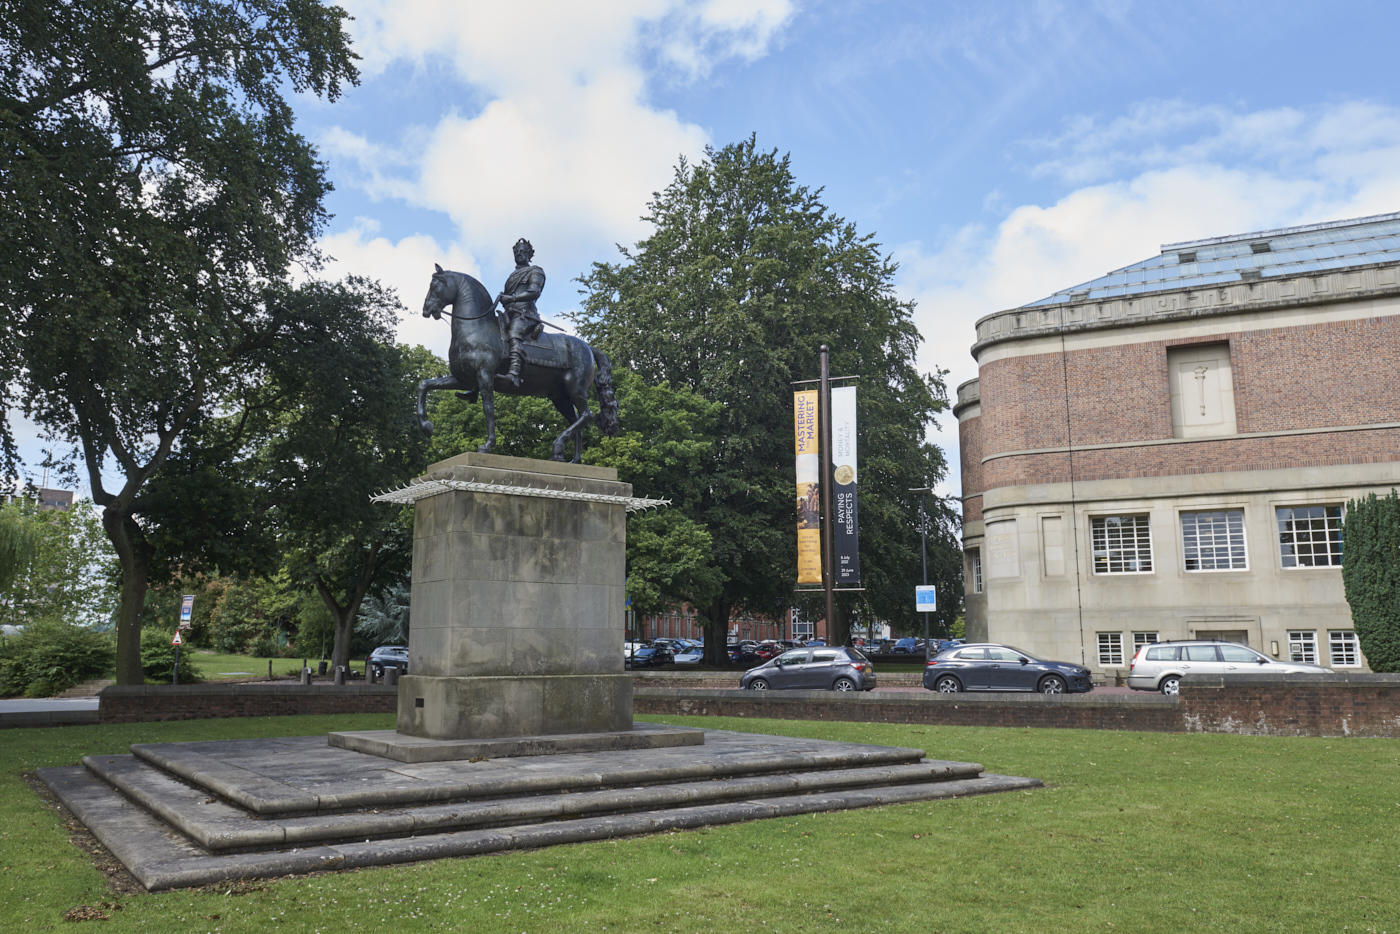 Bronze sculpture of King George I on Horseback by John Nost II on tall concrete plinth in context with Barber Institute in the background to the right